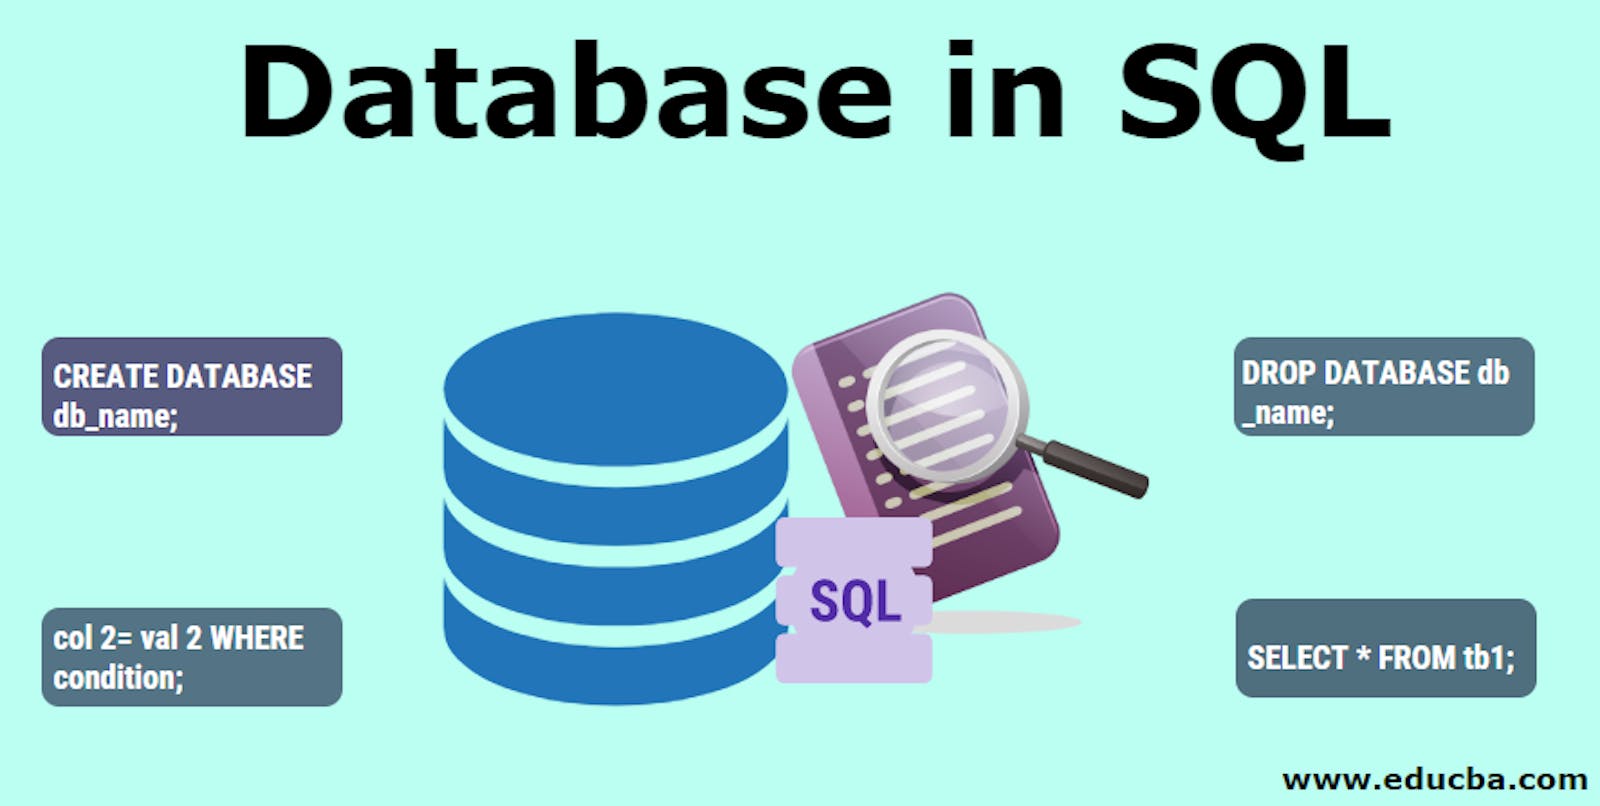 Introduction to Databases - SQL